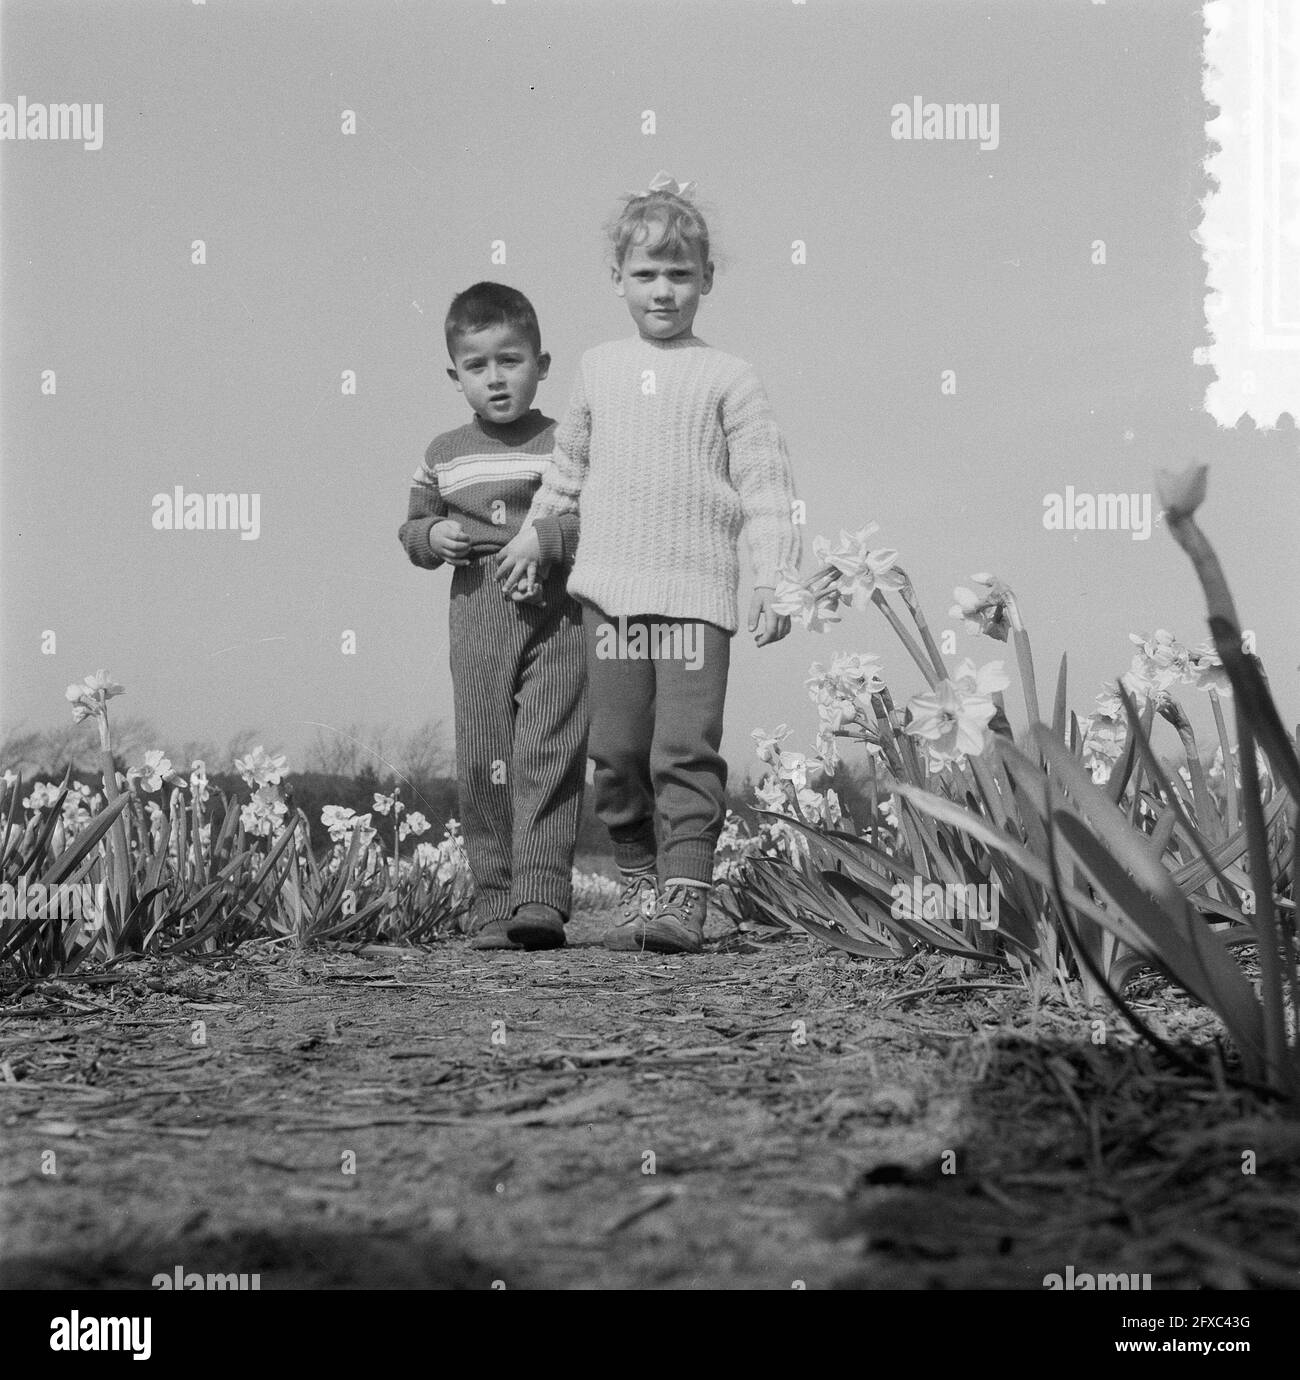 Children in Daffodil Fields near Noordwijk and Lisse, March 12, 1957, Children, The Netherlands, 20th century press agency photo, news to remember, documentary, historic photography 1945-1990, visual stories, human history of the Twentieth Century, capturing moments in time Stock Photo